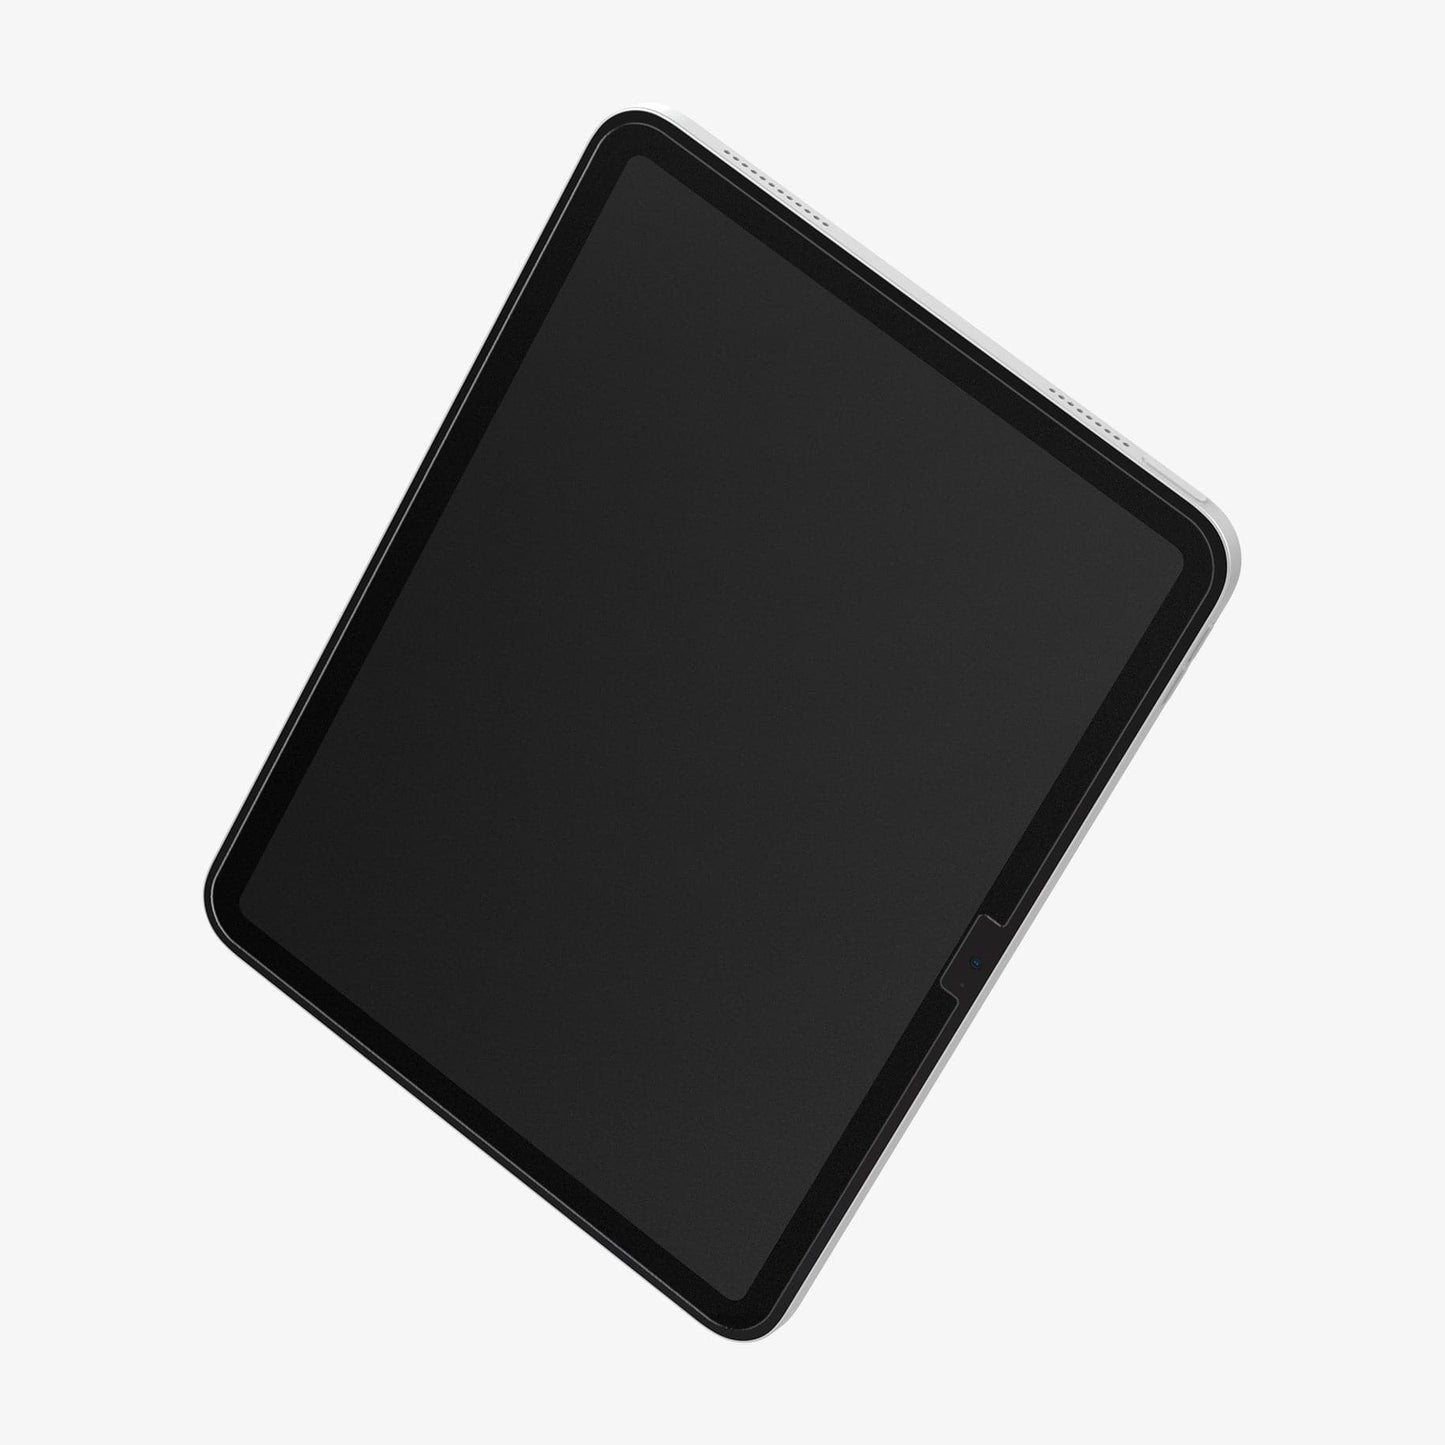 AFL05537 - iPad 10.9" Screen Protector Paper Touch Pro showing the front and partial top